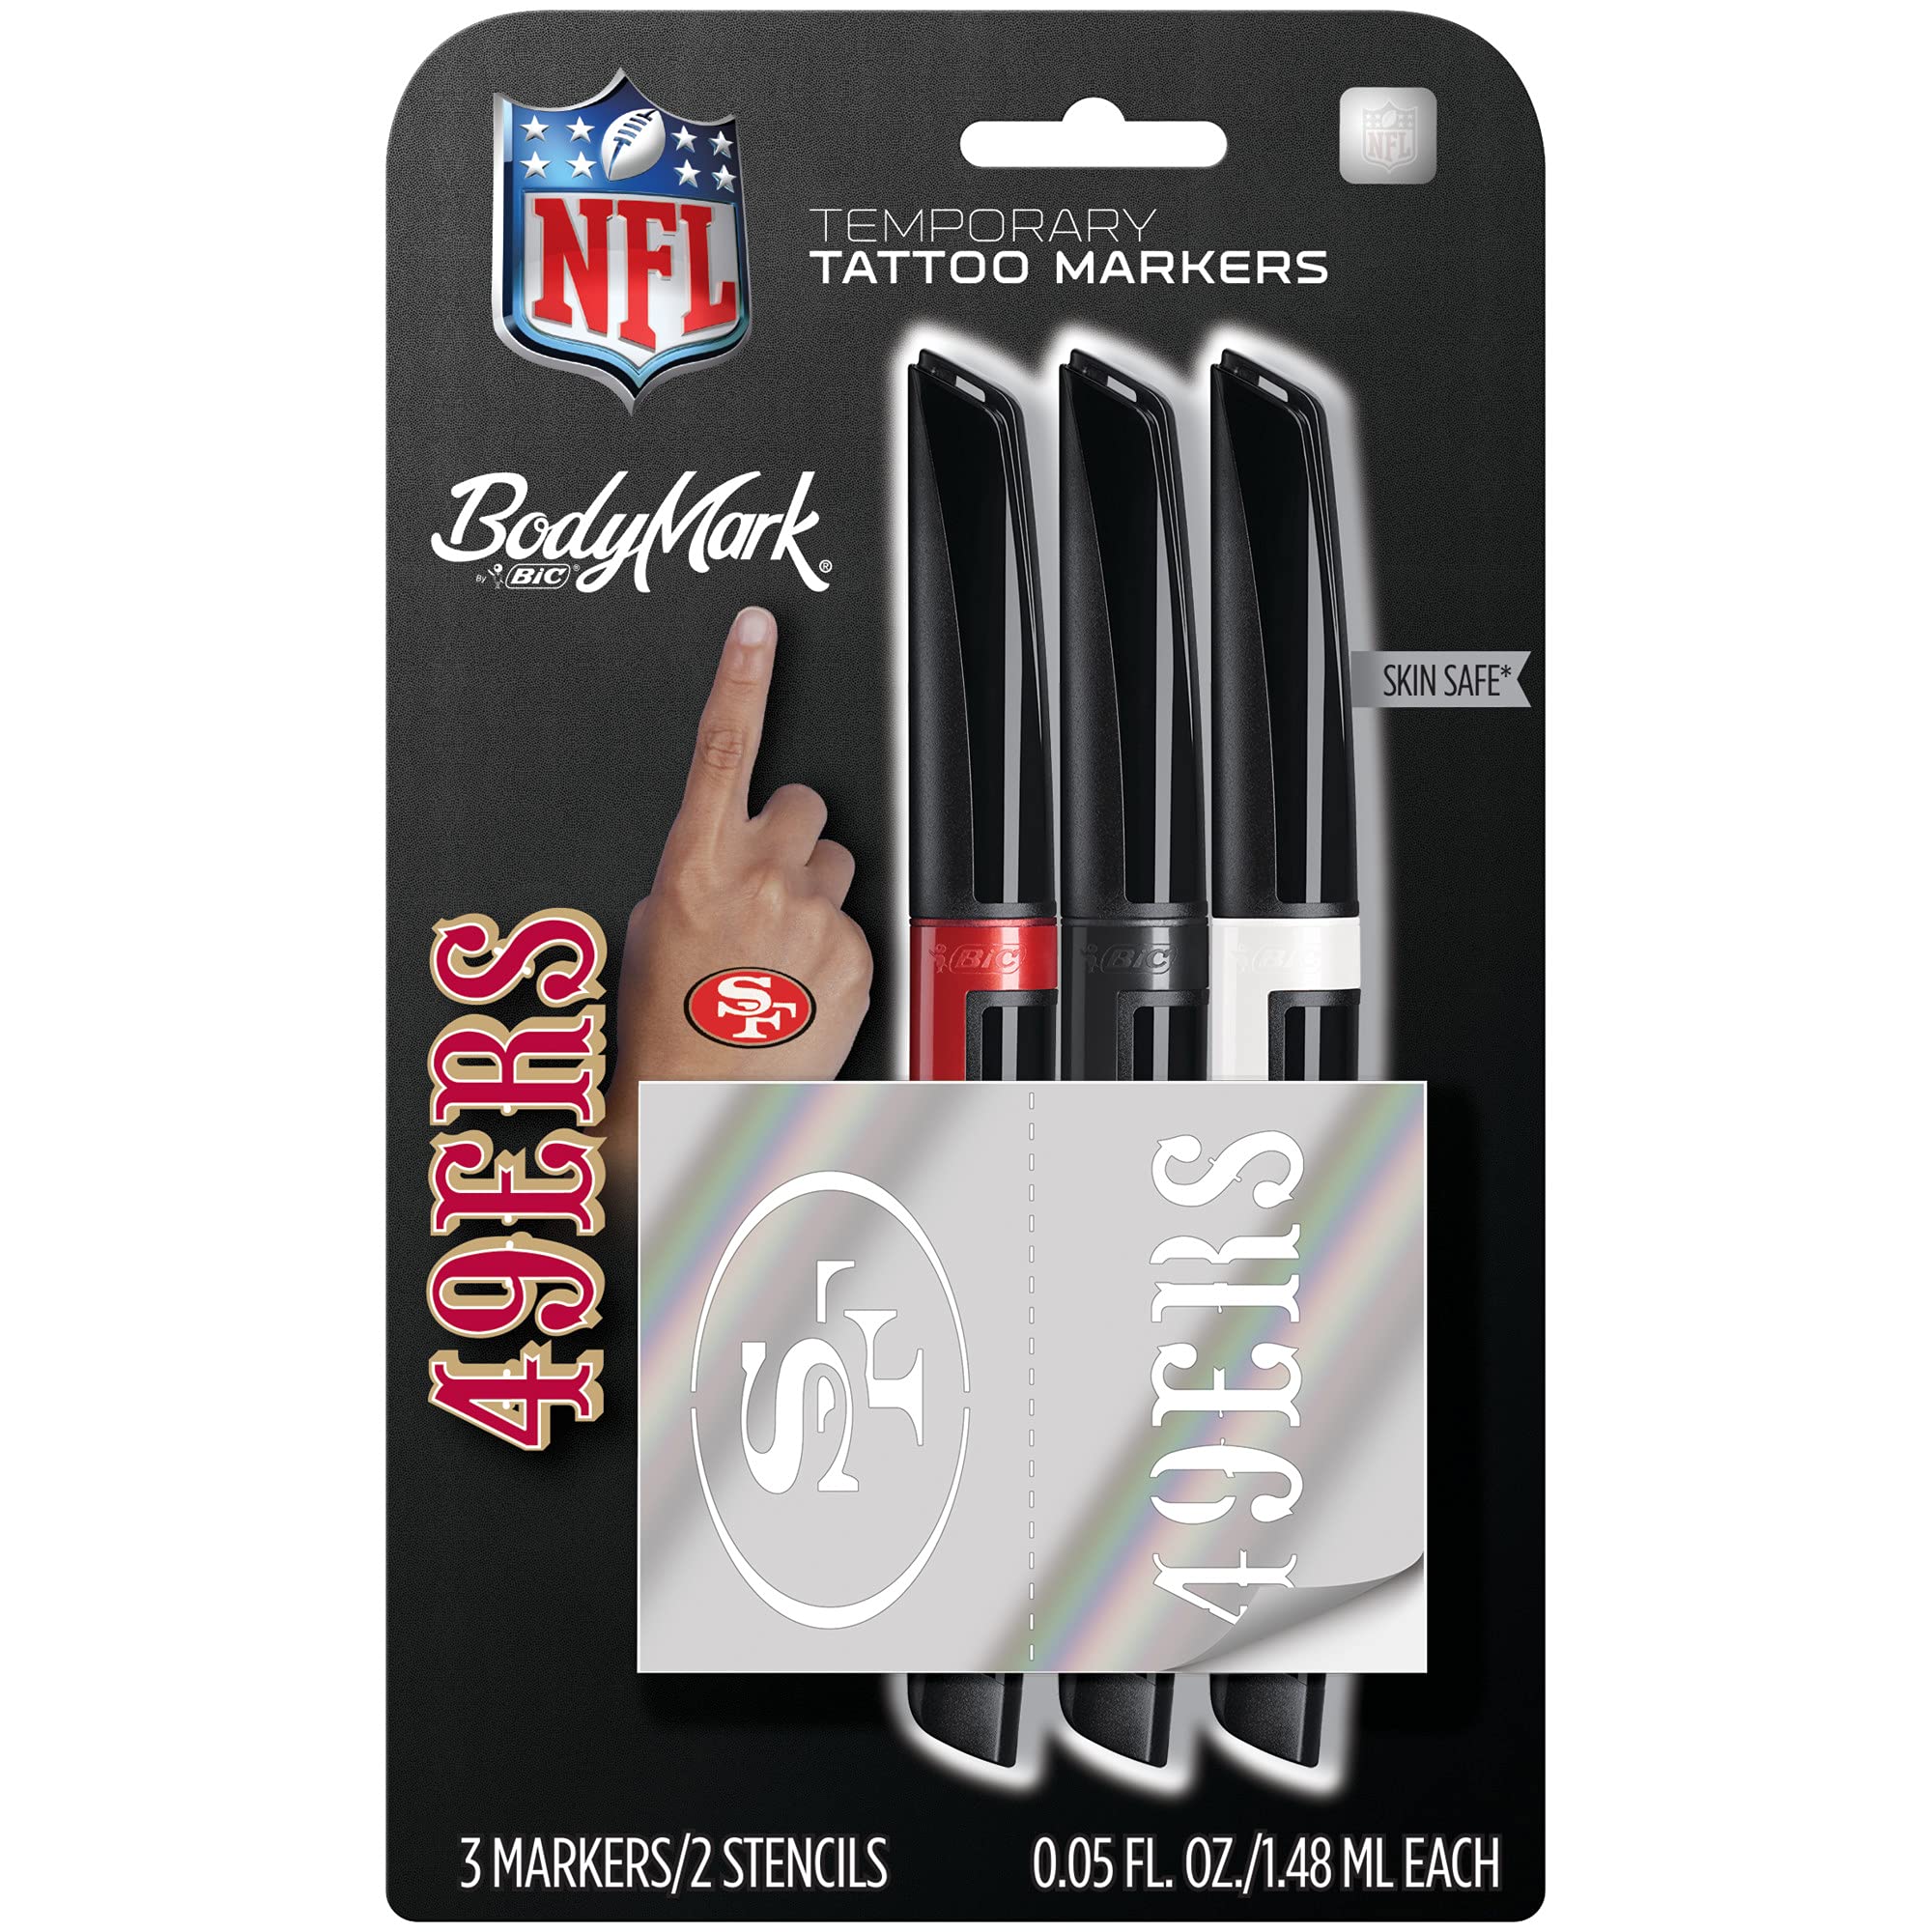 BodyMark by BIC, Temporary Tattoo Marker, NFL Series, San Francisco 49ers, Skin Safe, Brush Tip, Assorted Colors, 3-Pack with Stencils